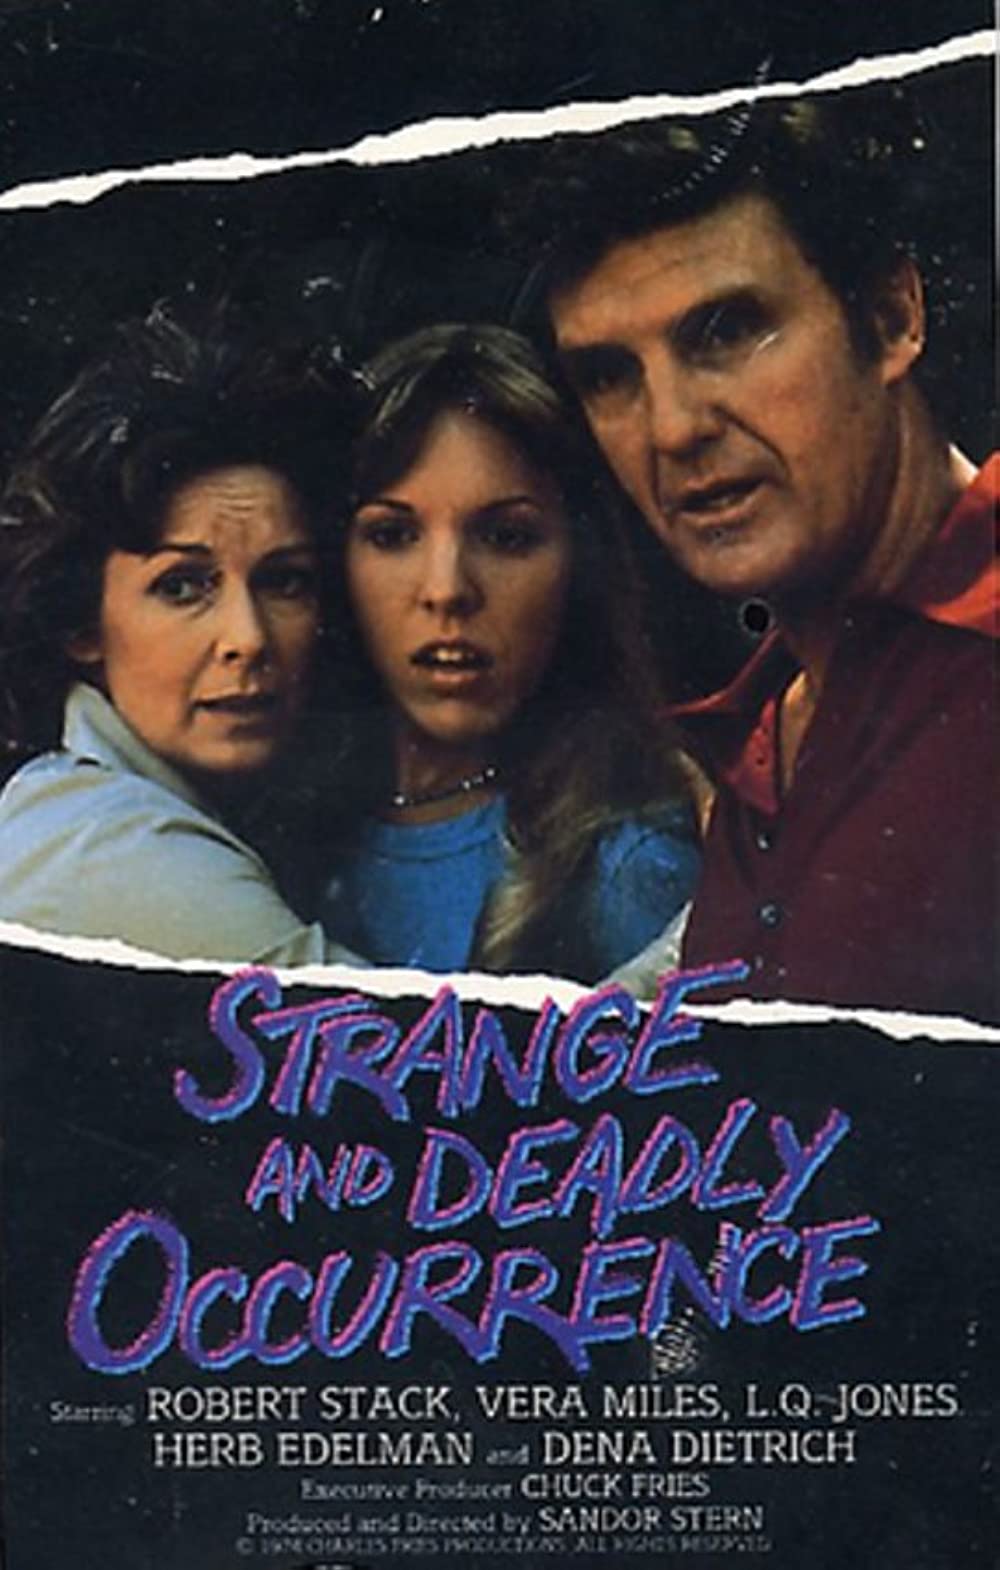 The Strange and Deadly Occurrence Dvd (1974)